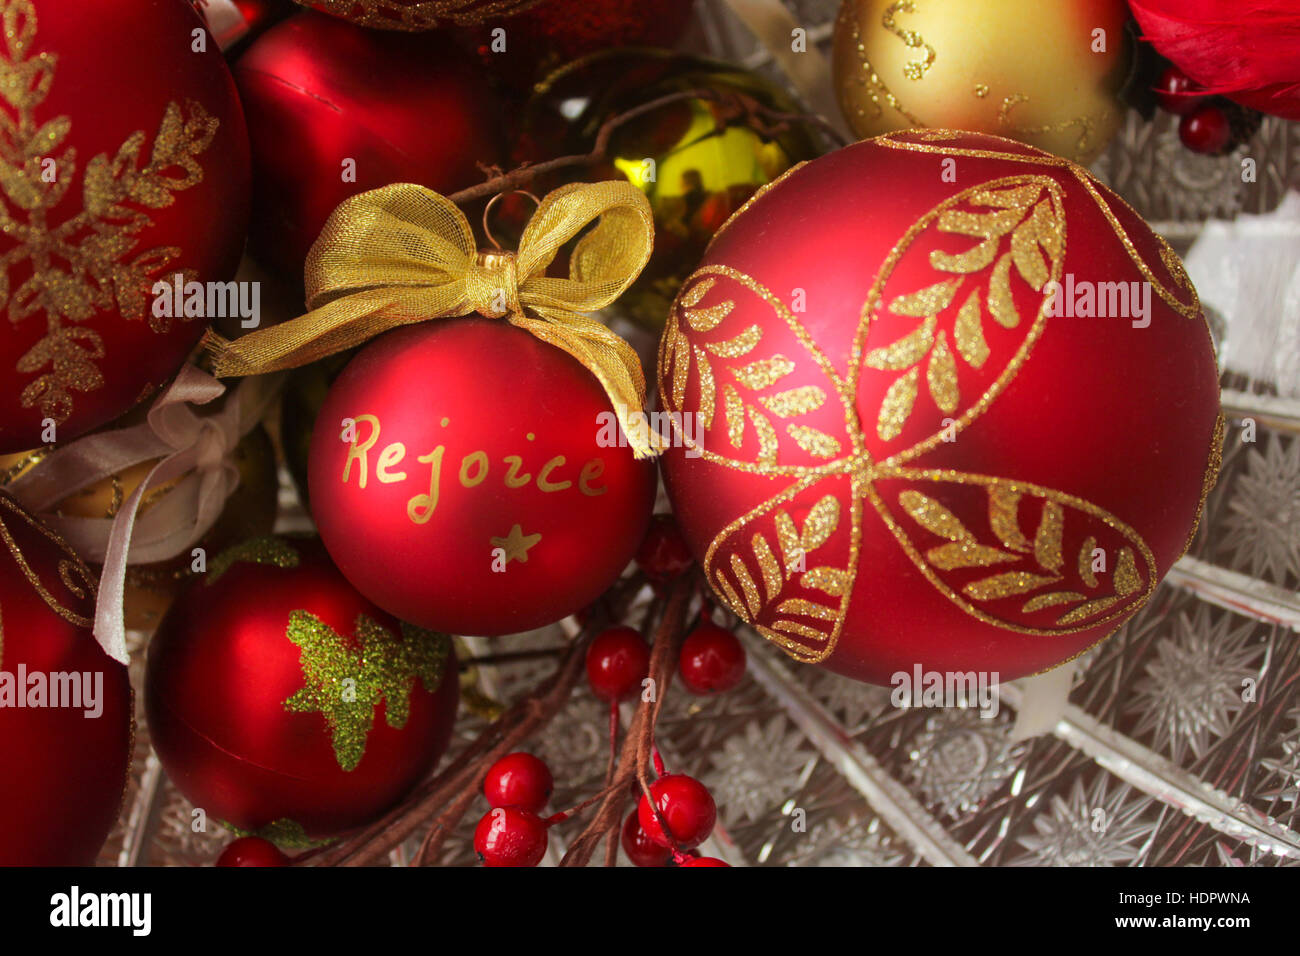 Decorative Christmas balls in a crystal bowl, focused on the postitioned-left word 'rejoice.' Stock Photo